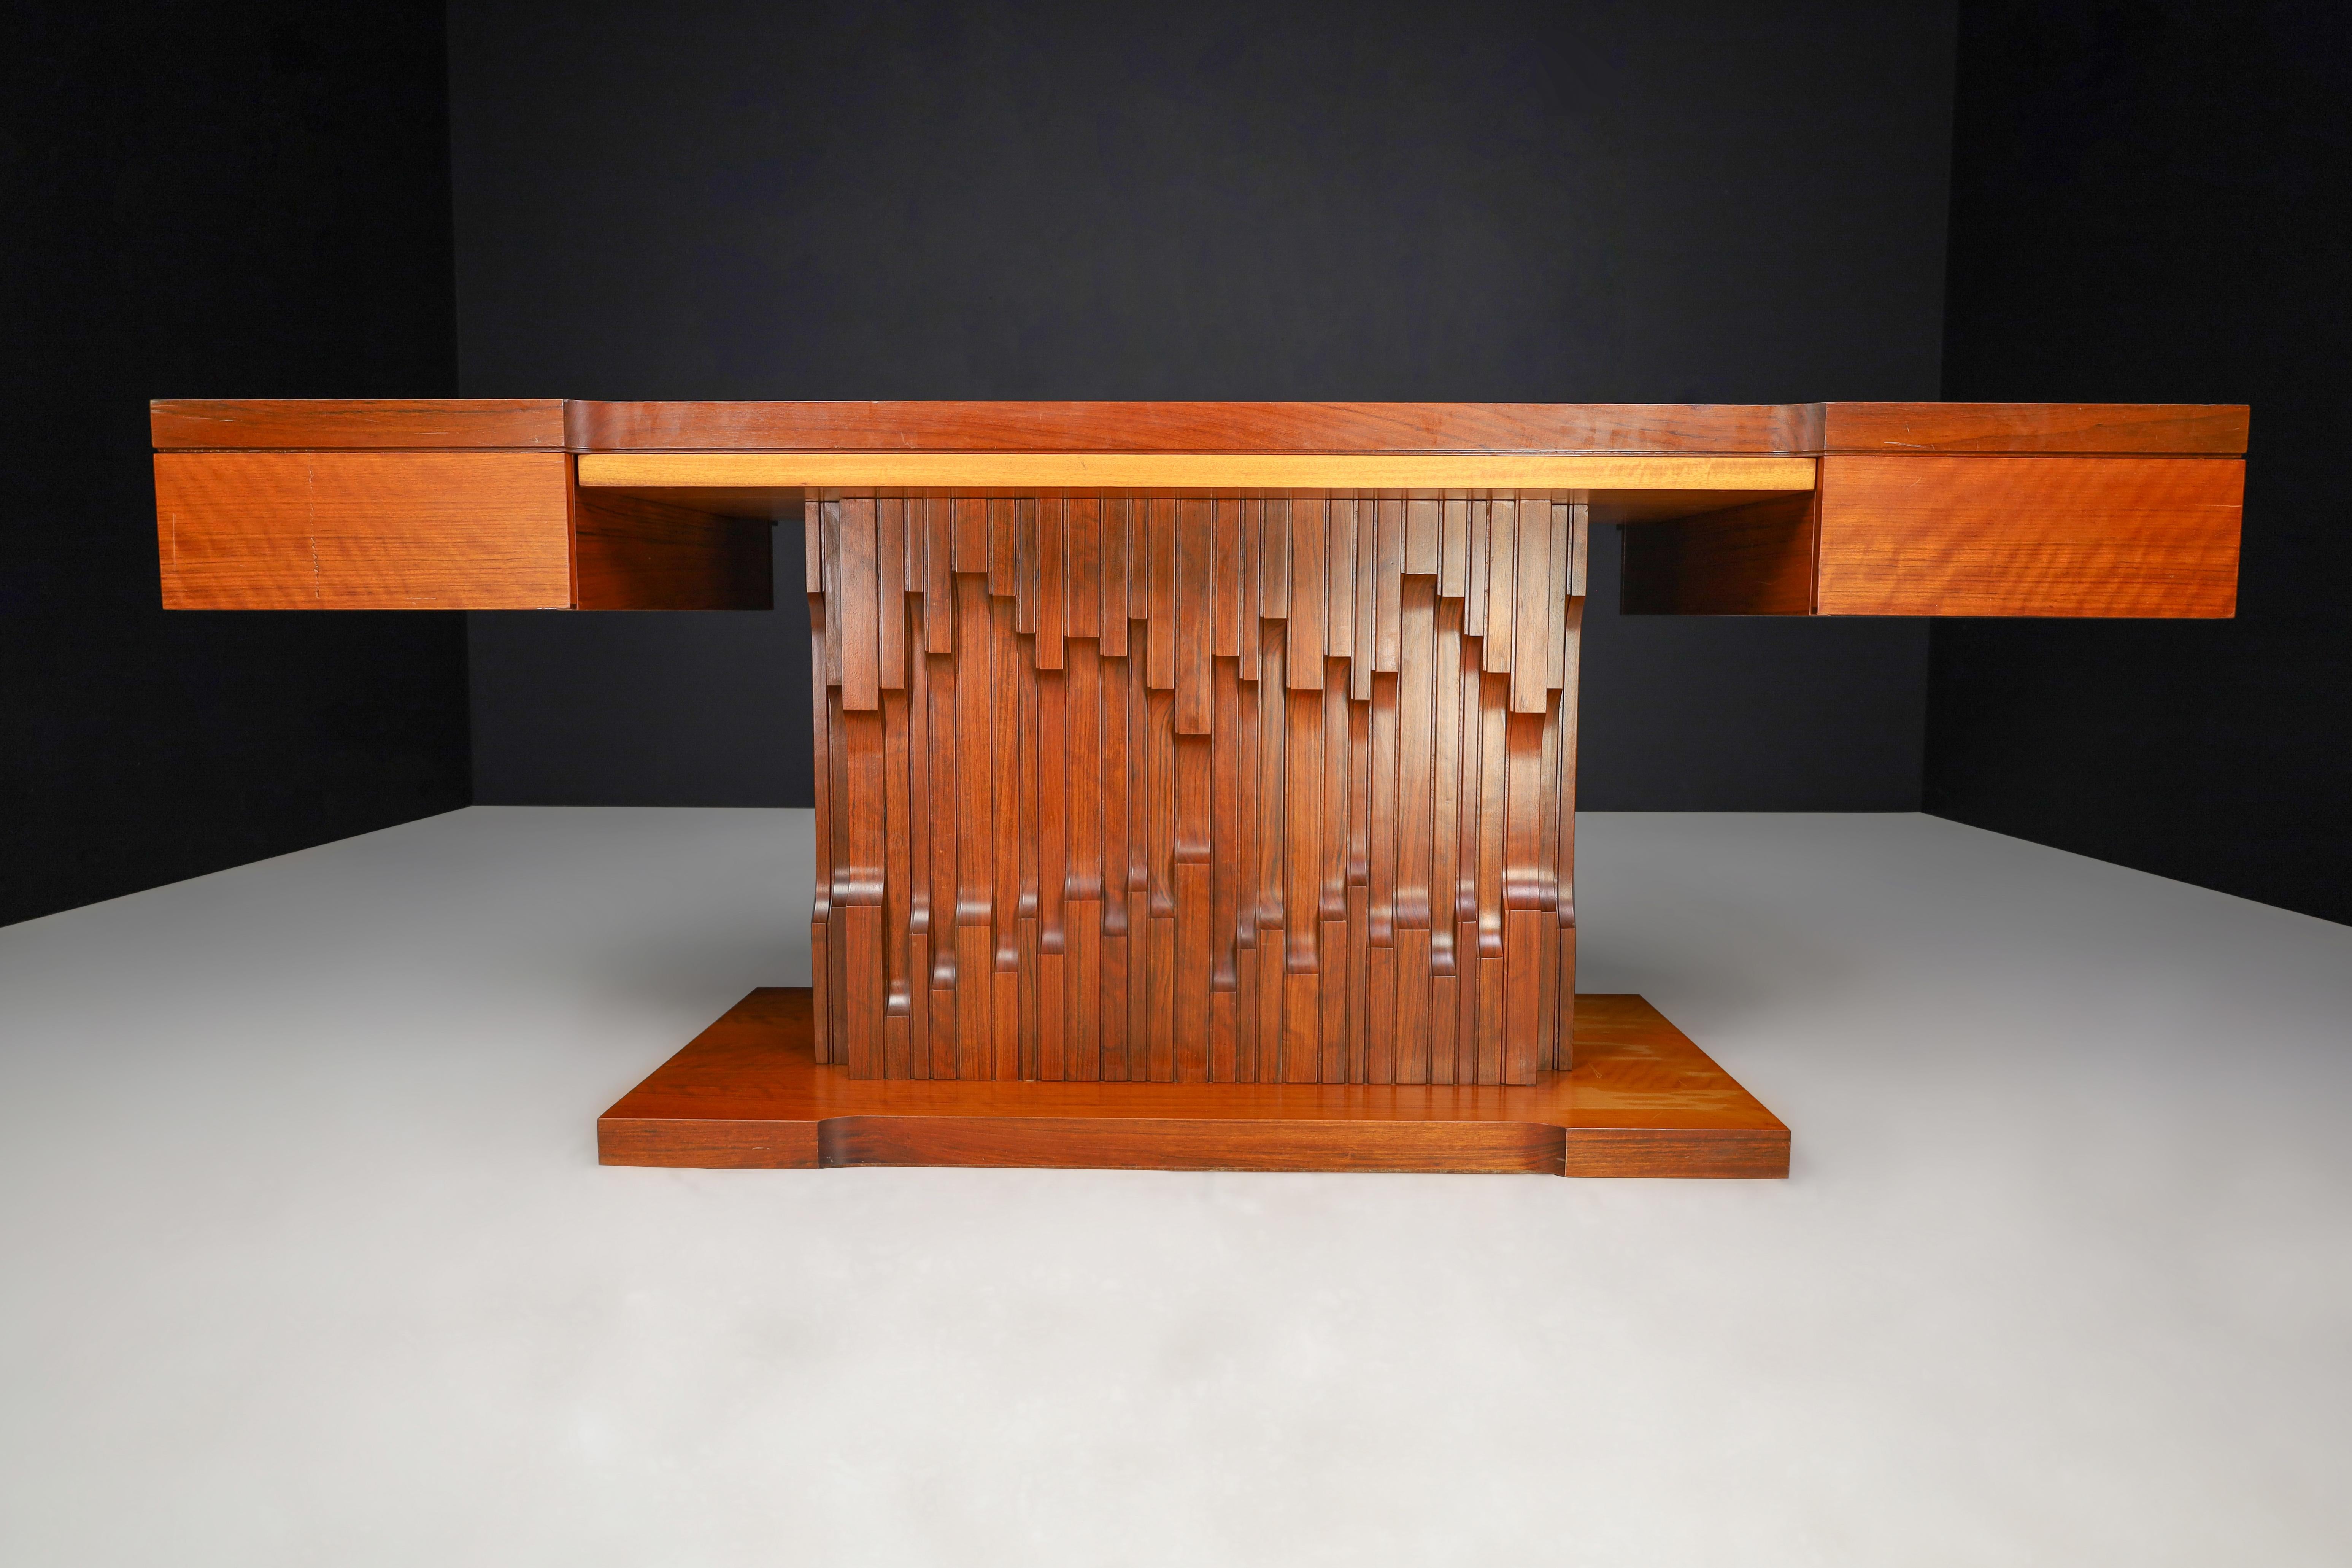 Luciano Frigerio Presidential Writing Desk in Walnut, Italy 1960s

This is a rare presidential mid-century desk designed by Luciano Frigerio for the 